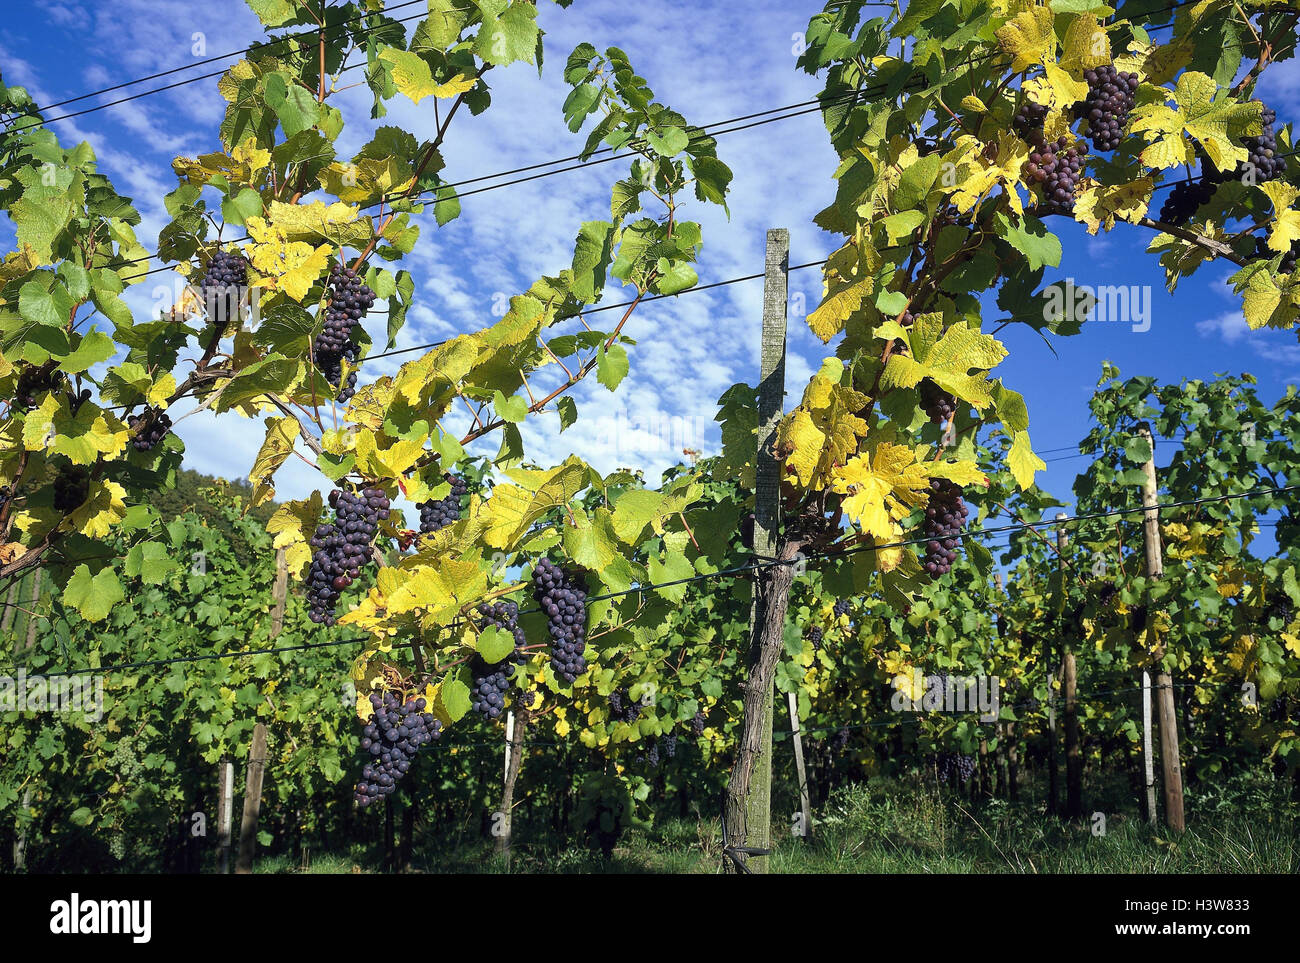 Germany, Baden-Wurttemberg, vines wine, Vitis vinifera, economy, agriculture, cultivation, vines, vines, vines, grapes, grapes, blue, fruits, wine-growing, viticulture, nature, plants, useful plants Stock Photo